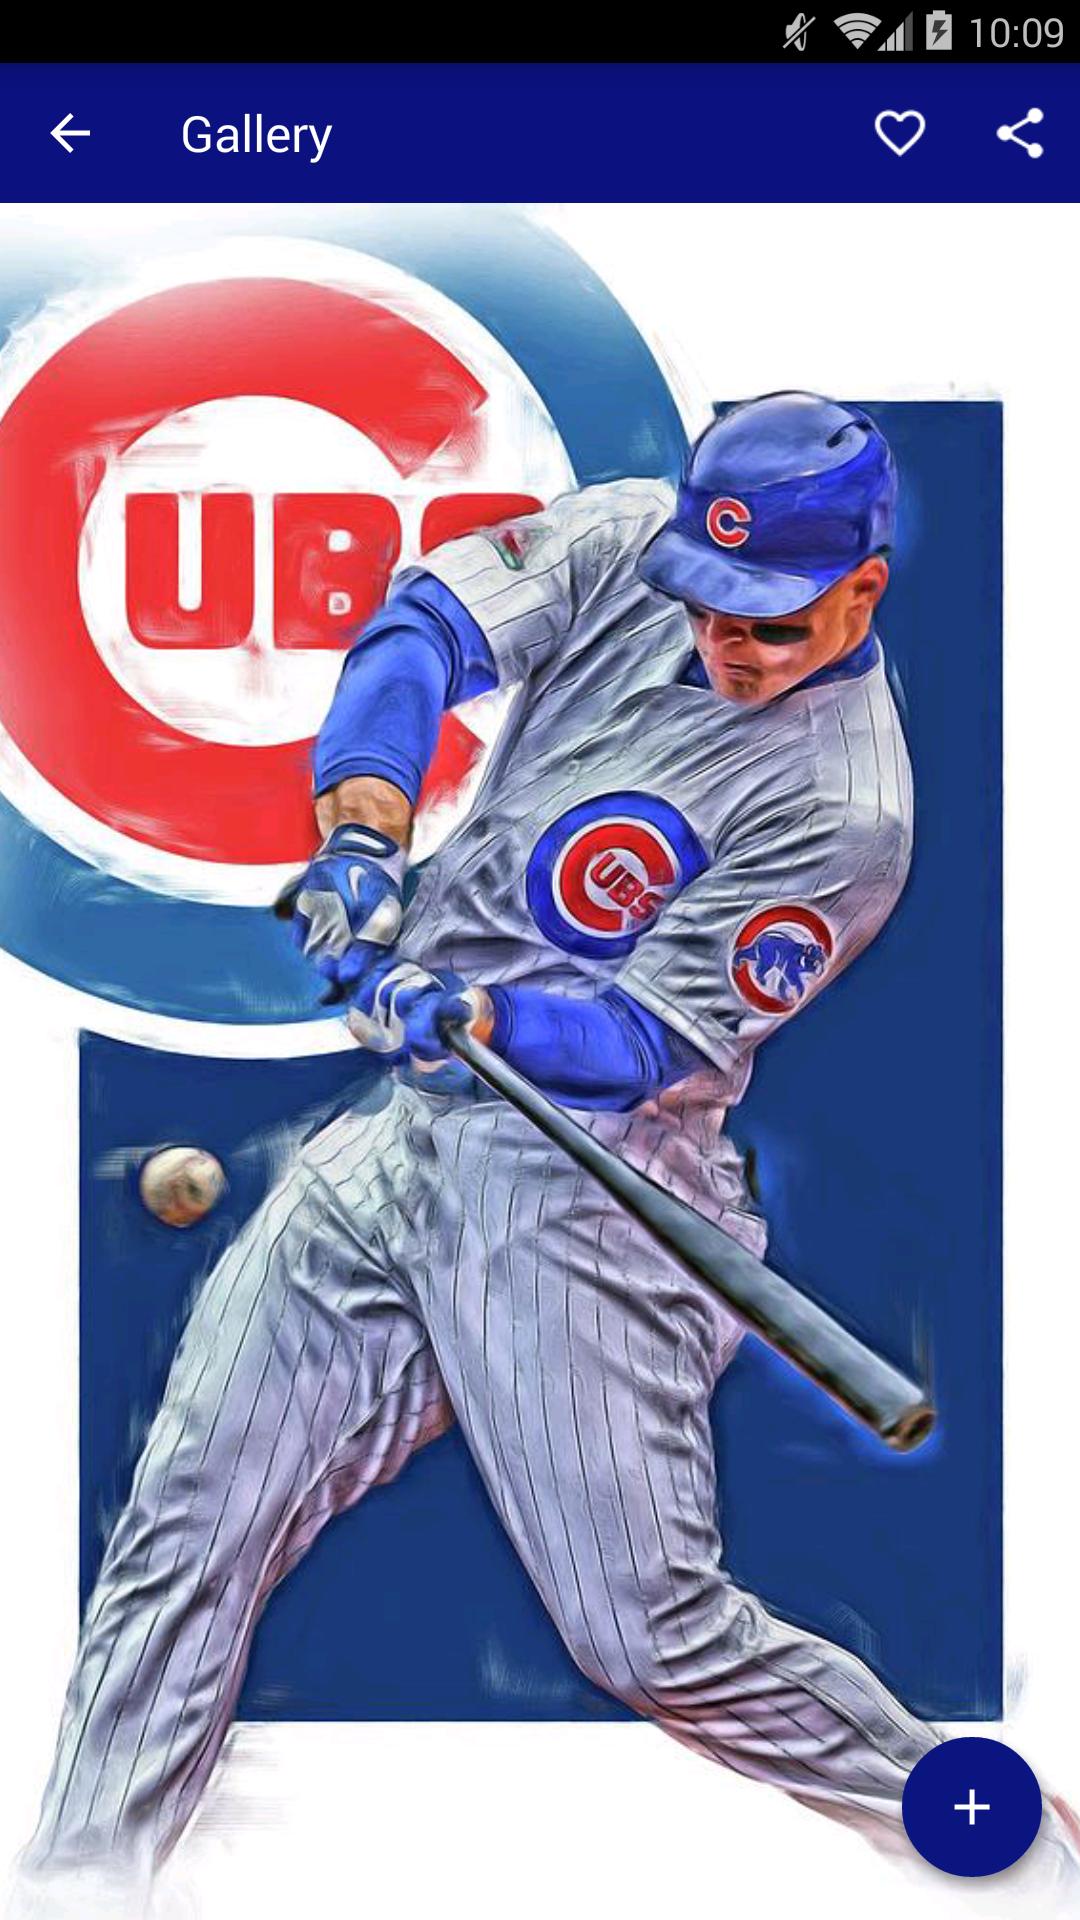 Anthony Rizzo Wallpapers Hd Mlb For Android Apk Download